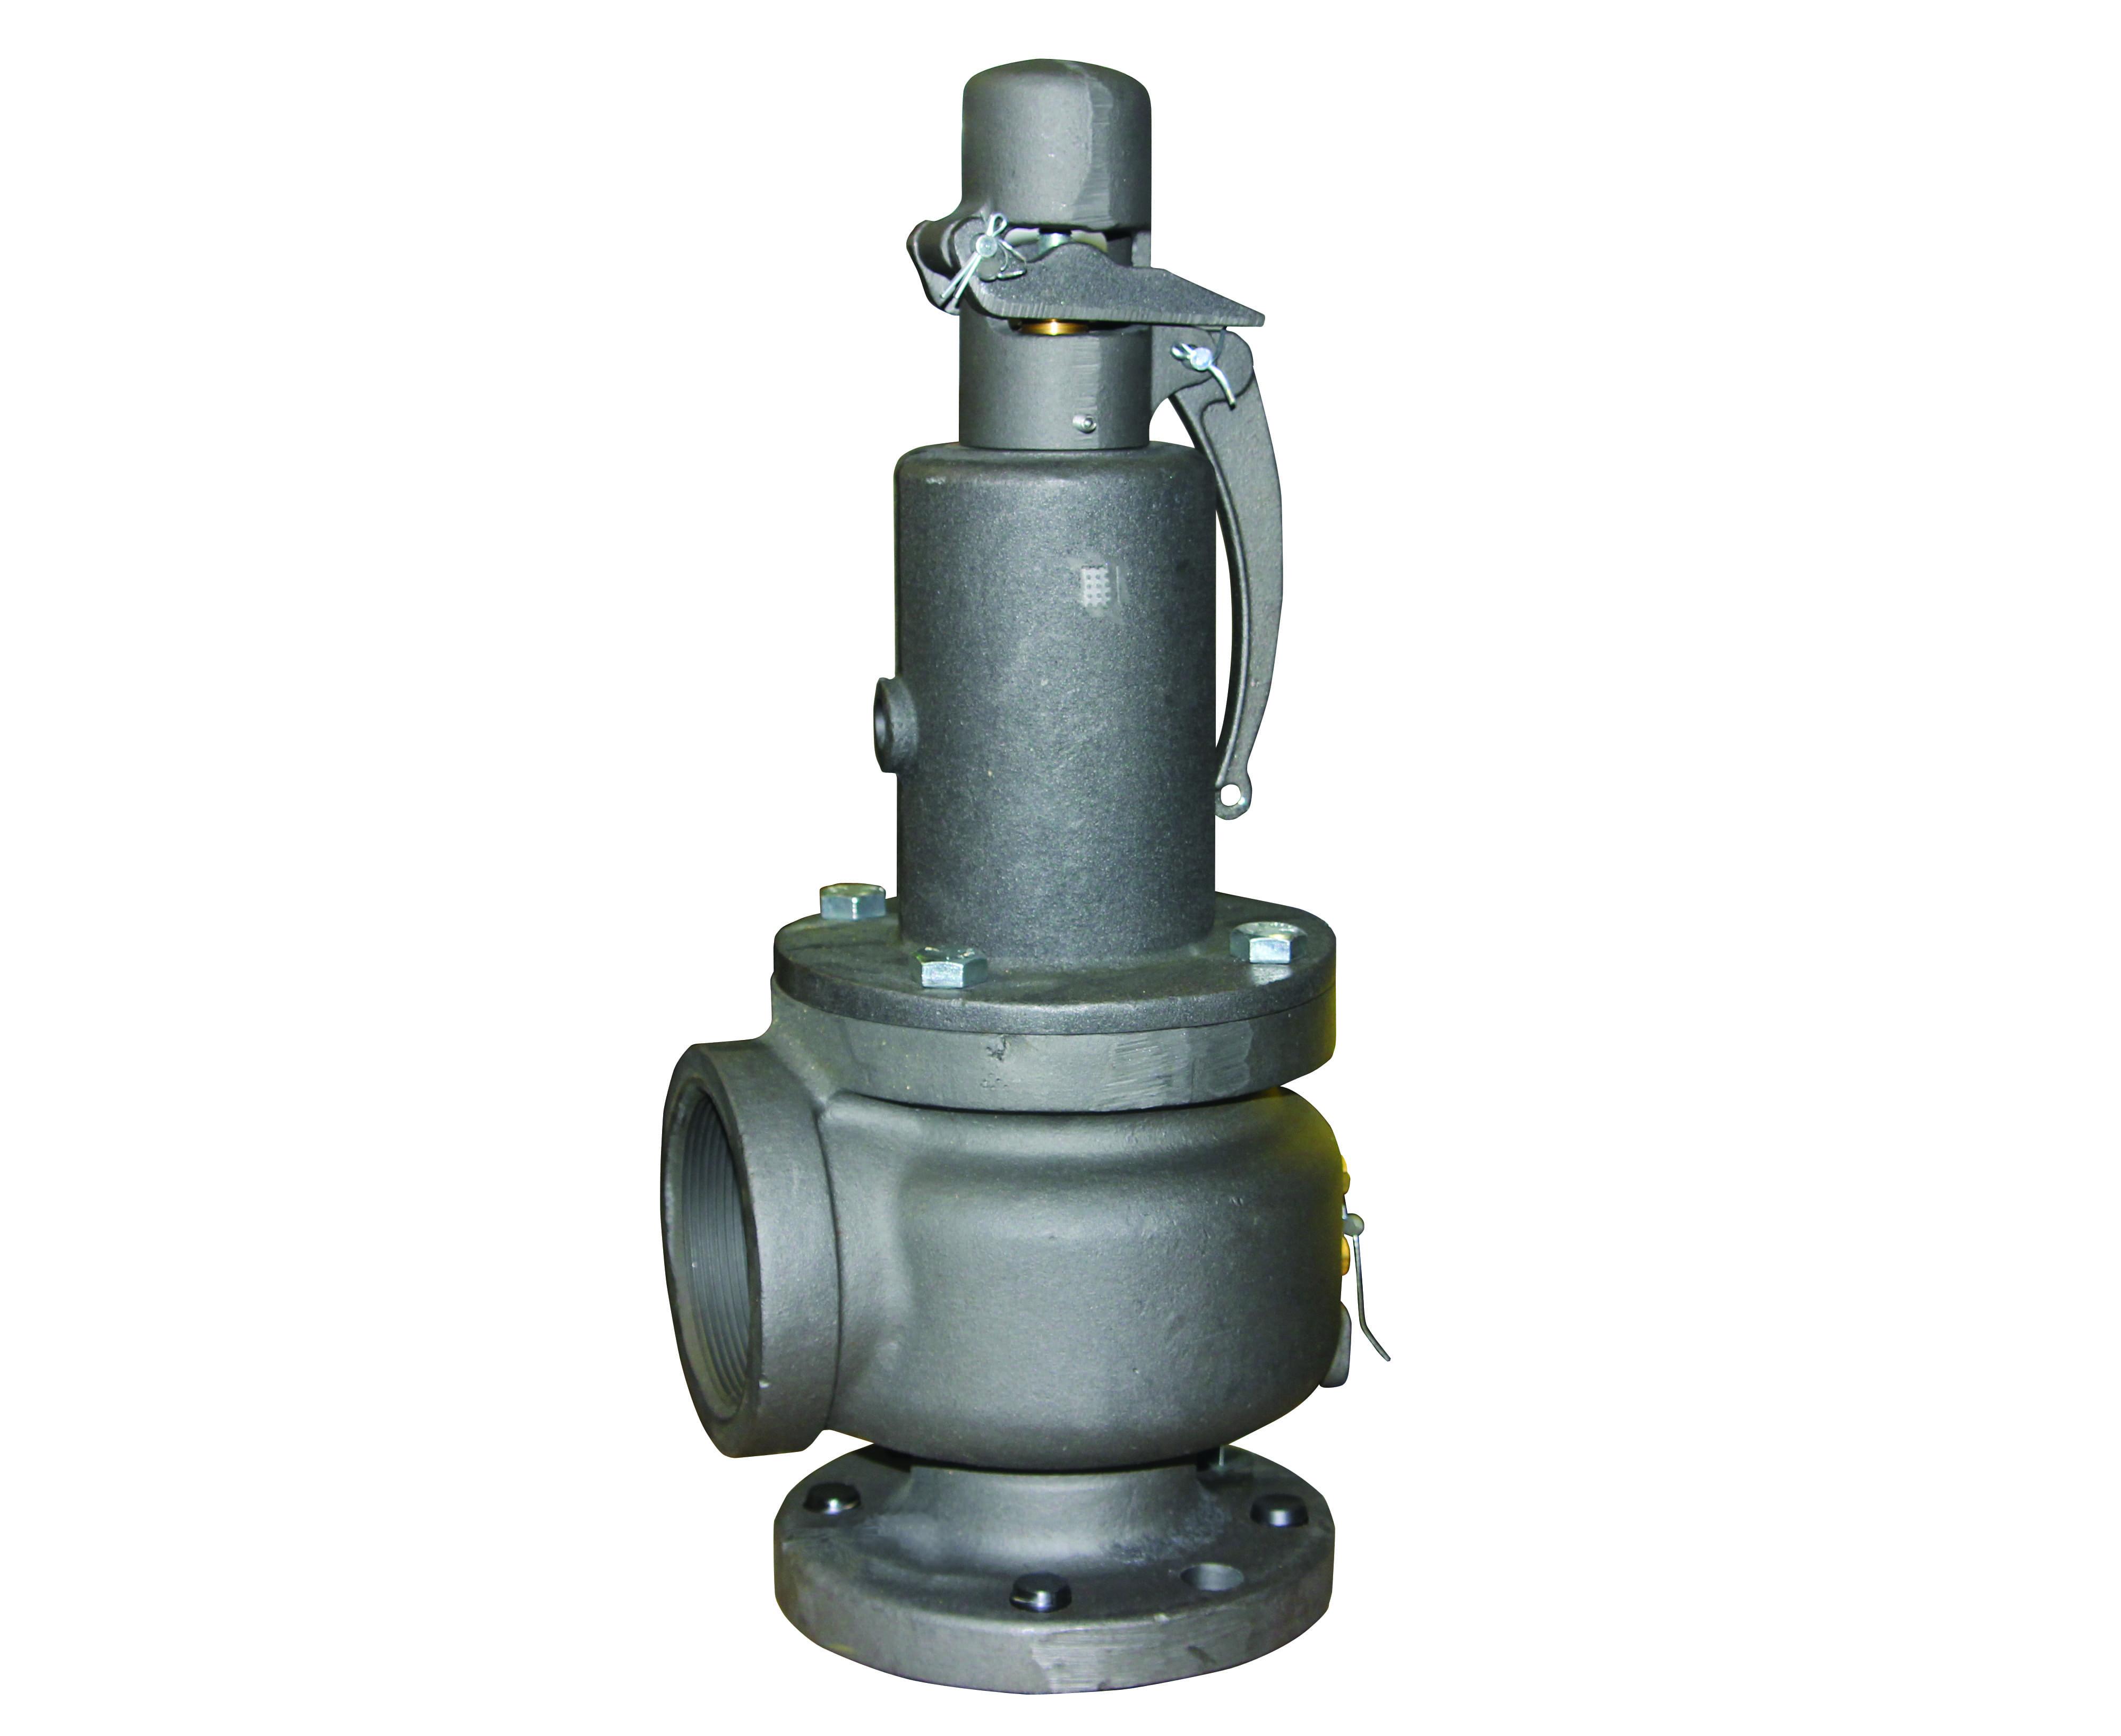 Preview image for Apollo ASME Section VIII Air Cast Iron Safety Relief Valve, 3" X 4" (Flange x FNPT)